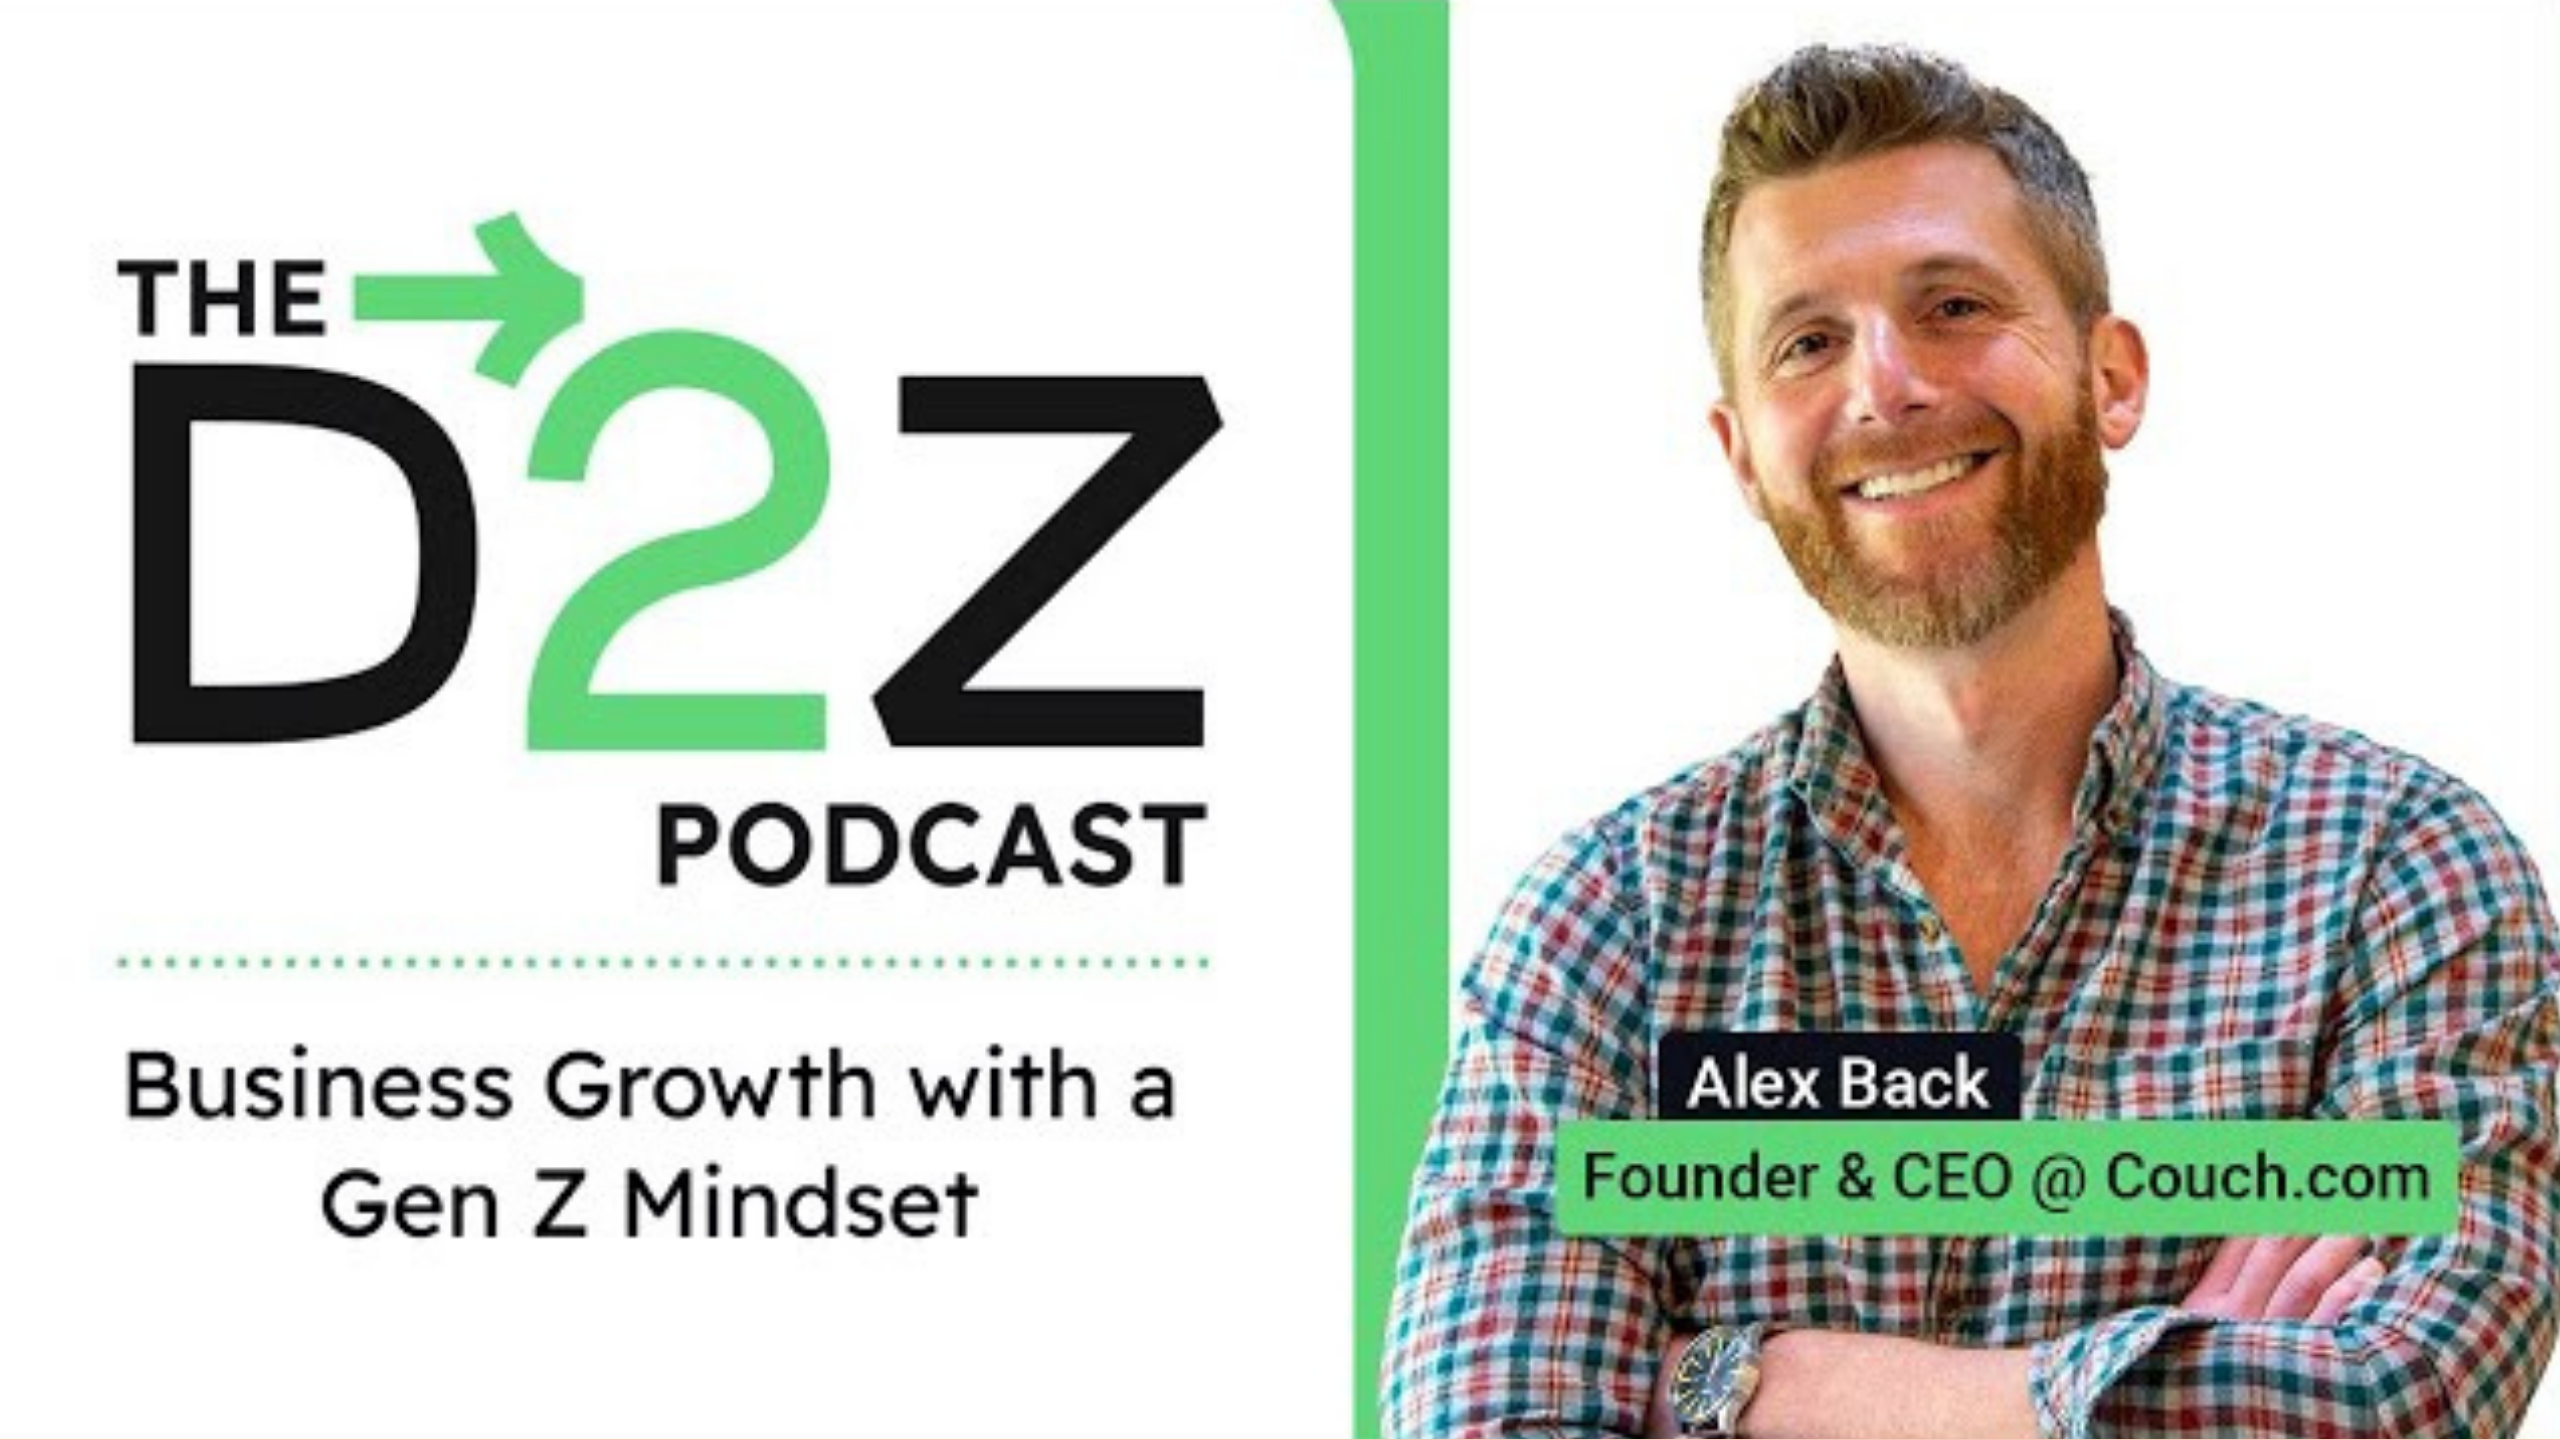 A promotional image for "The D2Z Podcast" featuring the text "Business Growth with a Gen Z Mindset." The image shows a smiling man with a beard, arms crossed, and labeled as Alex Back, Founder & CEO @ Couch.com. The background is a combination of white and green.